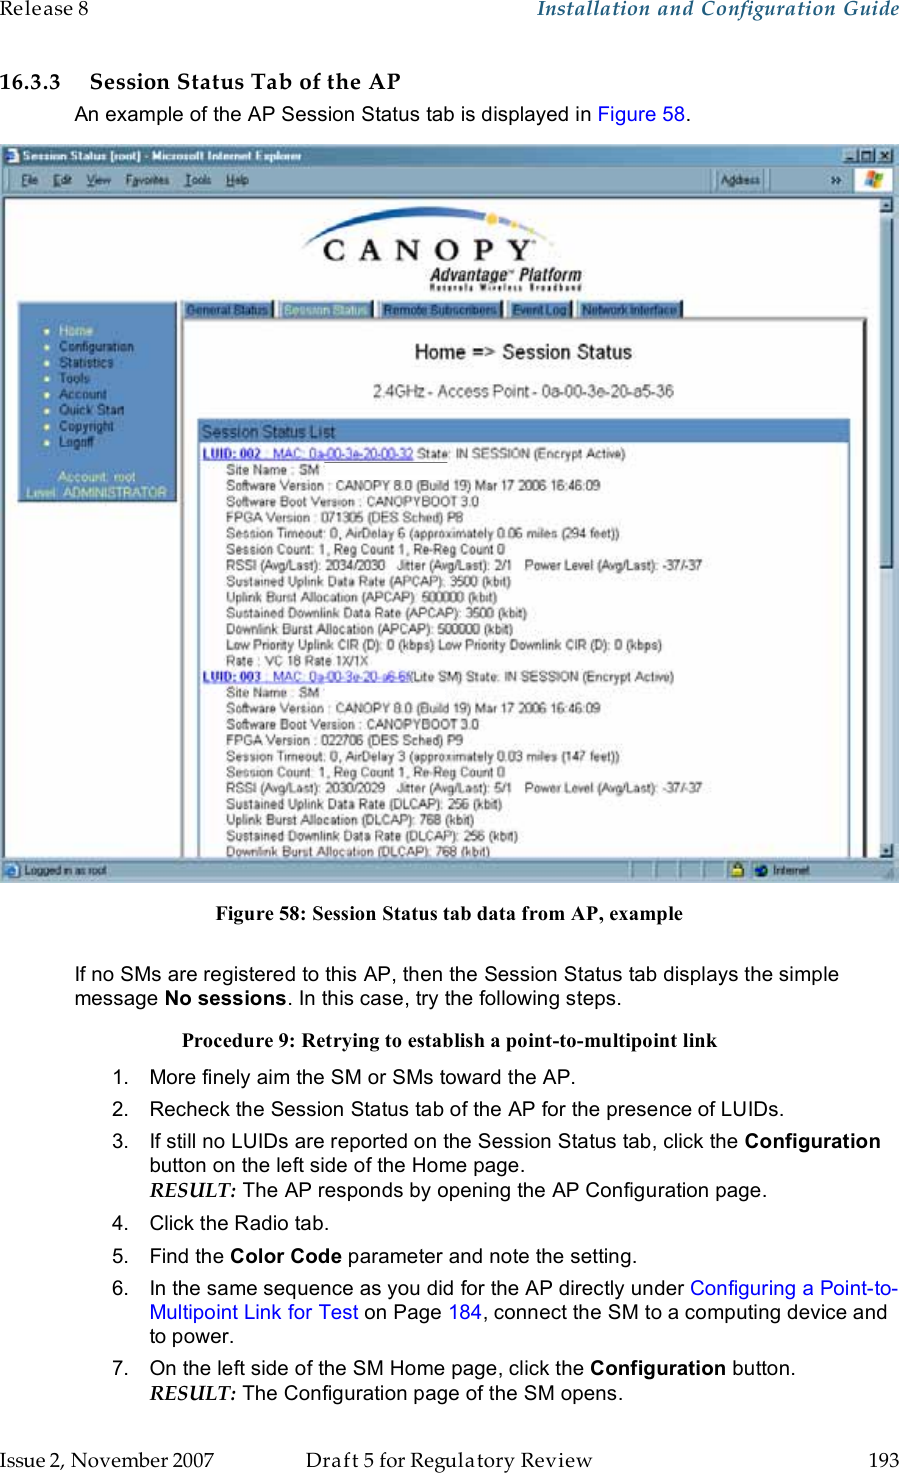 Release 8    Installation and Configuration Guide   Issue 2, November 2007  Draft 5 for Regulatory Review  193     16.3.3 Session Status Tab of the AP An example of the AP Session Status tab is displayed in Figure 58.  Figure 58: Session Status tab data from AP, example  If no SMs are registered to this AP, then the Session Status tab displays the simple message No sessions. In this case, try the following steps. Procedure 9: Retrying to establish a point-to-multipoint link 1.  More finely aim the SM or SMs toward the AP. 2.  Recheck the Session Status tab of the AP for the presence of LUIDs. 3.  If still no LUIDs are reported on the Session Status tab, click the Configuration button on the left side of the Home page. RESULT: The AP responds by opening the AP Configuration page. 4.  Click the Radio tab. 5.  Find the Color Code parameter and note the setting. 6.  In the same sequence as you did for the AP directly under Configuring a Point-to-Multipoint Link for Test on Page 184, connect the SM to a computing device and to power. 7.  On the left side of the SM Home page, click the Configuration button.  RESULT: The Configuration page of the SM opens. 